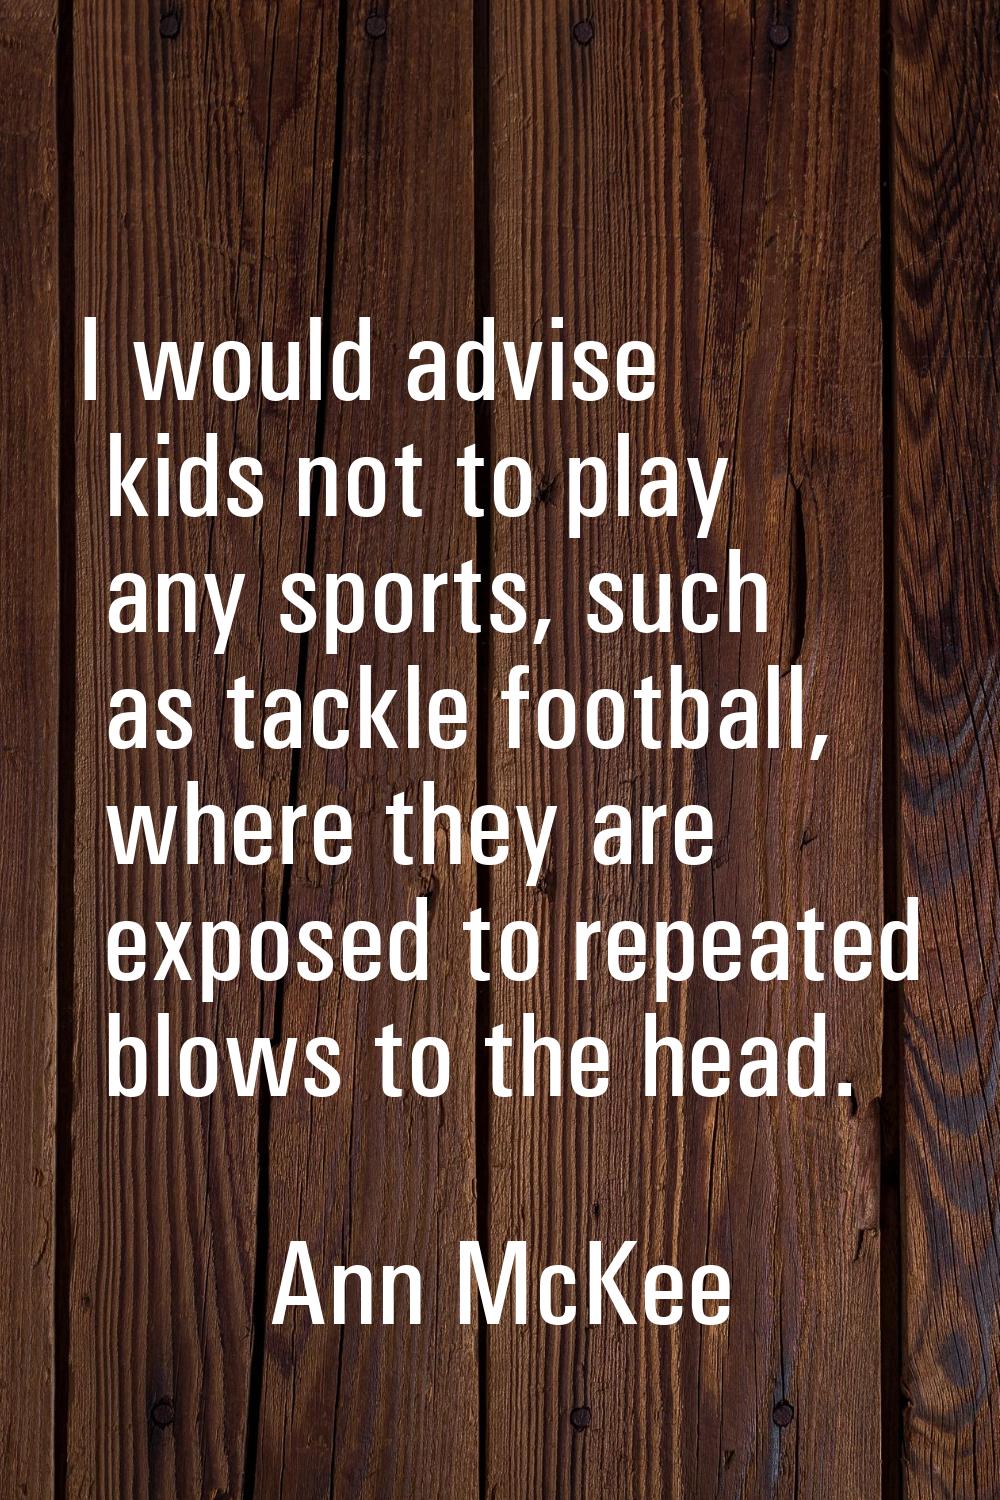 I would advise kids not to play any sports, such as tackle football, where they are exposed to repe